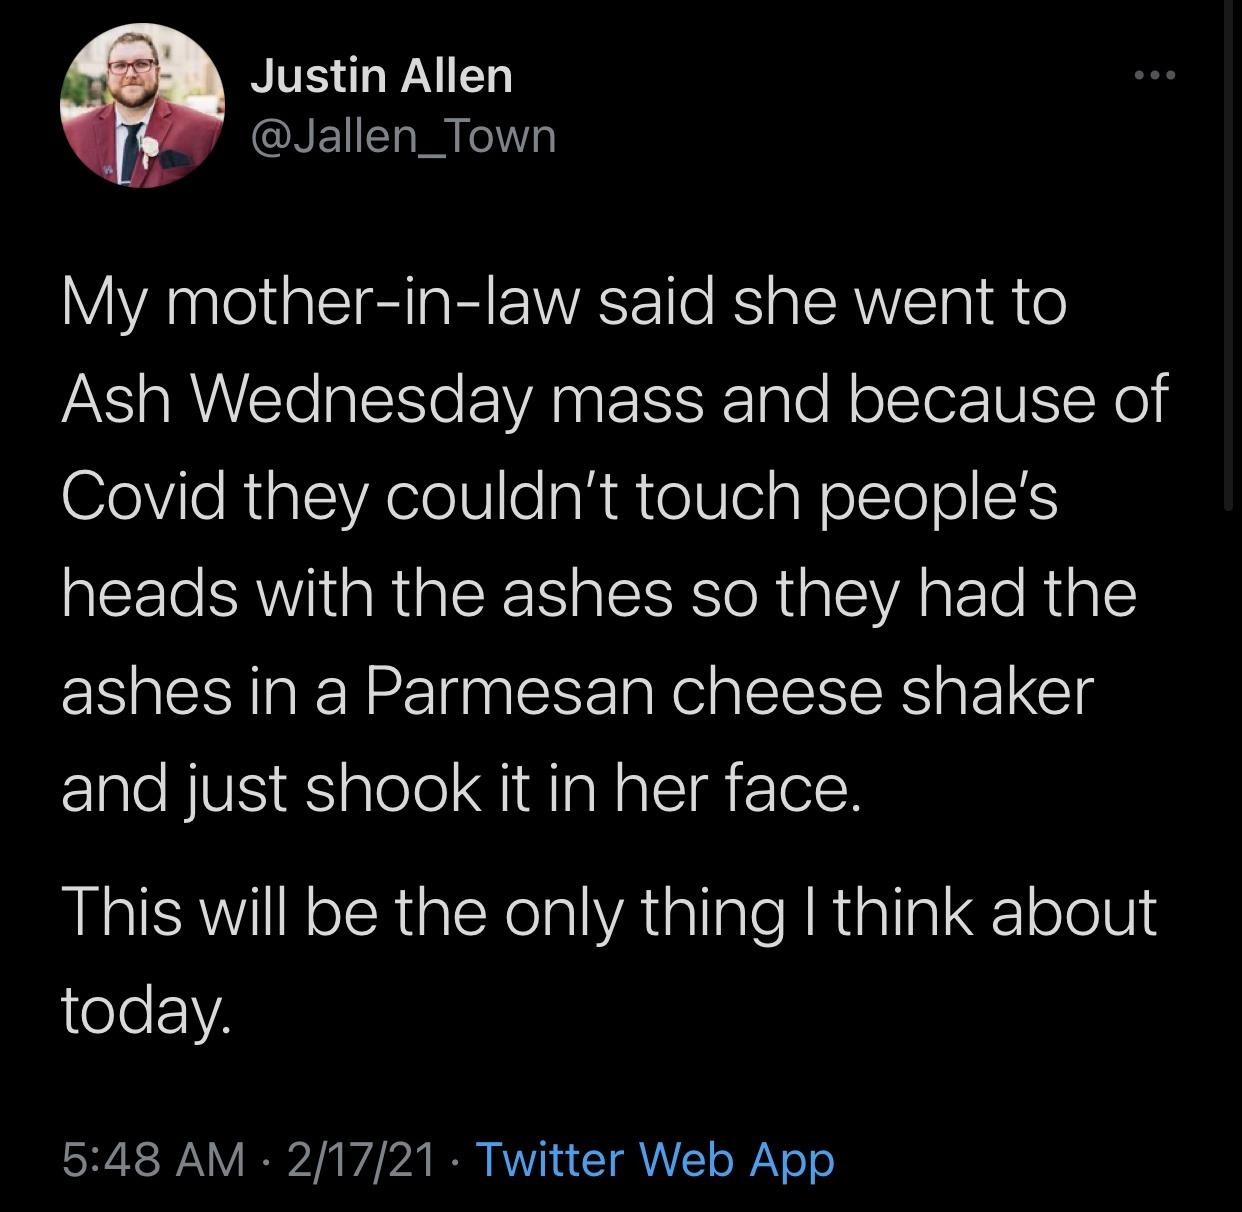 atmosphere - Justin Allen My motherinlaw said she went to Ash Wednesday mass and because of Covid they couldn't touch people's heads with the ashes so they had the ashes in a Parmesan cheese shaker and just shook it in her face. This will be the only thin